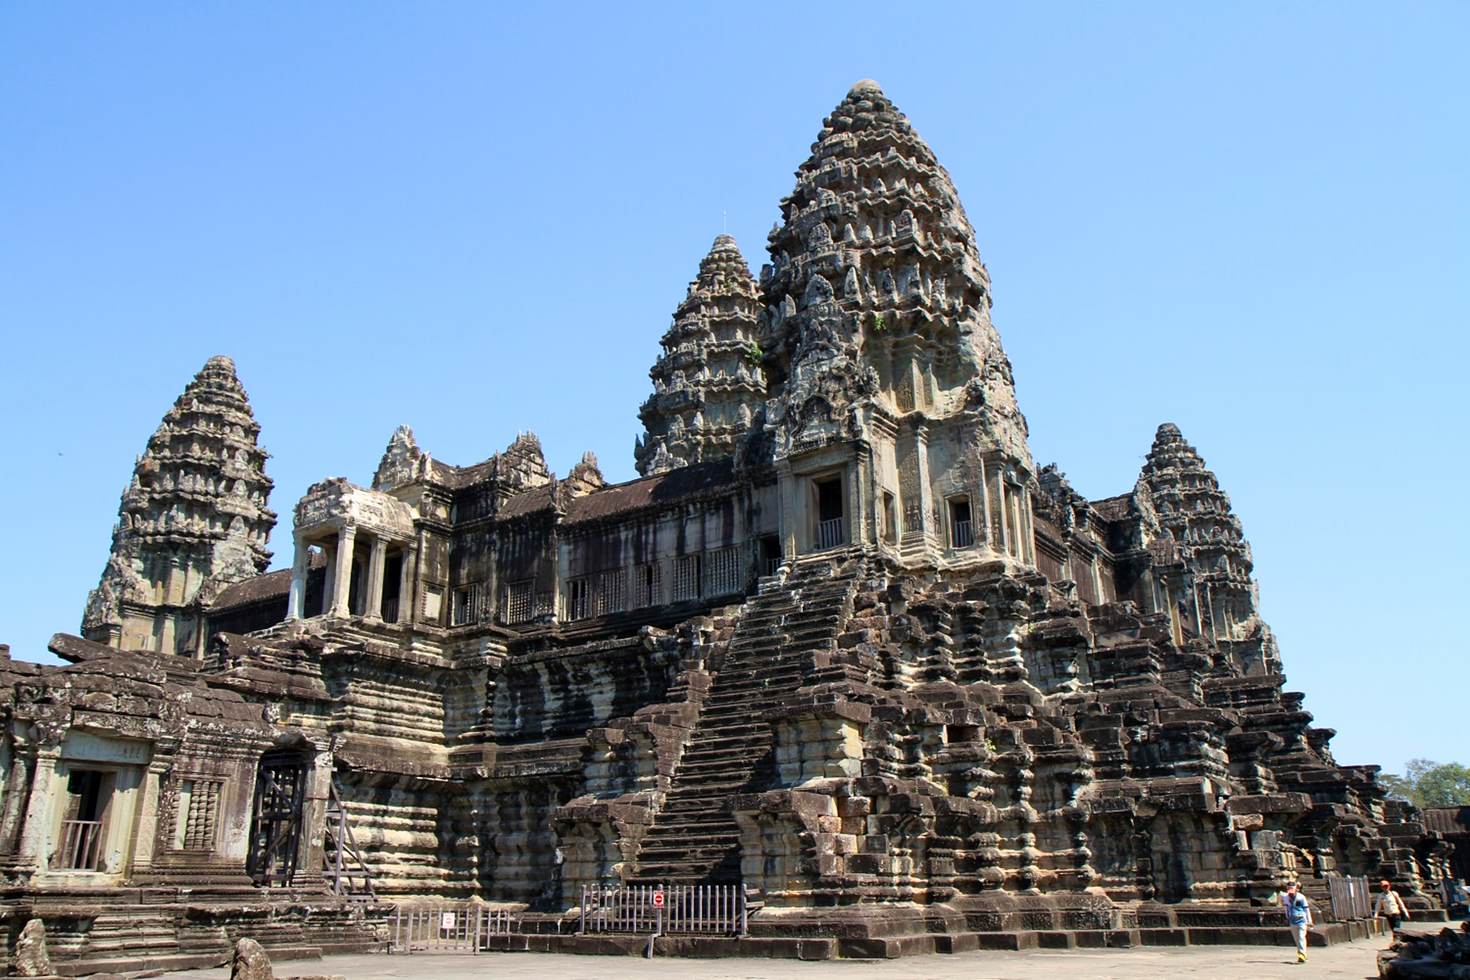 Excursions to Cambodia and Vietnam